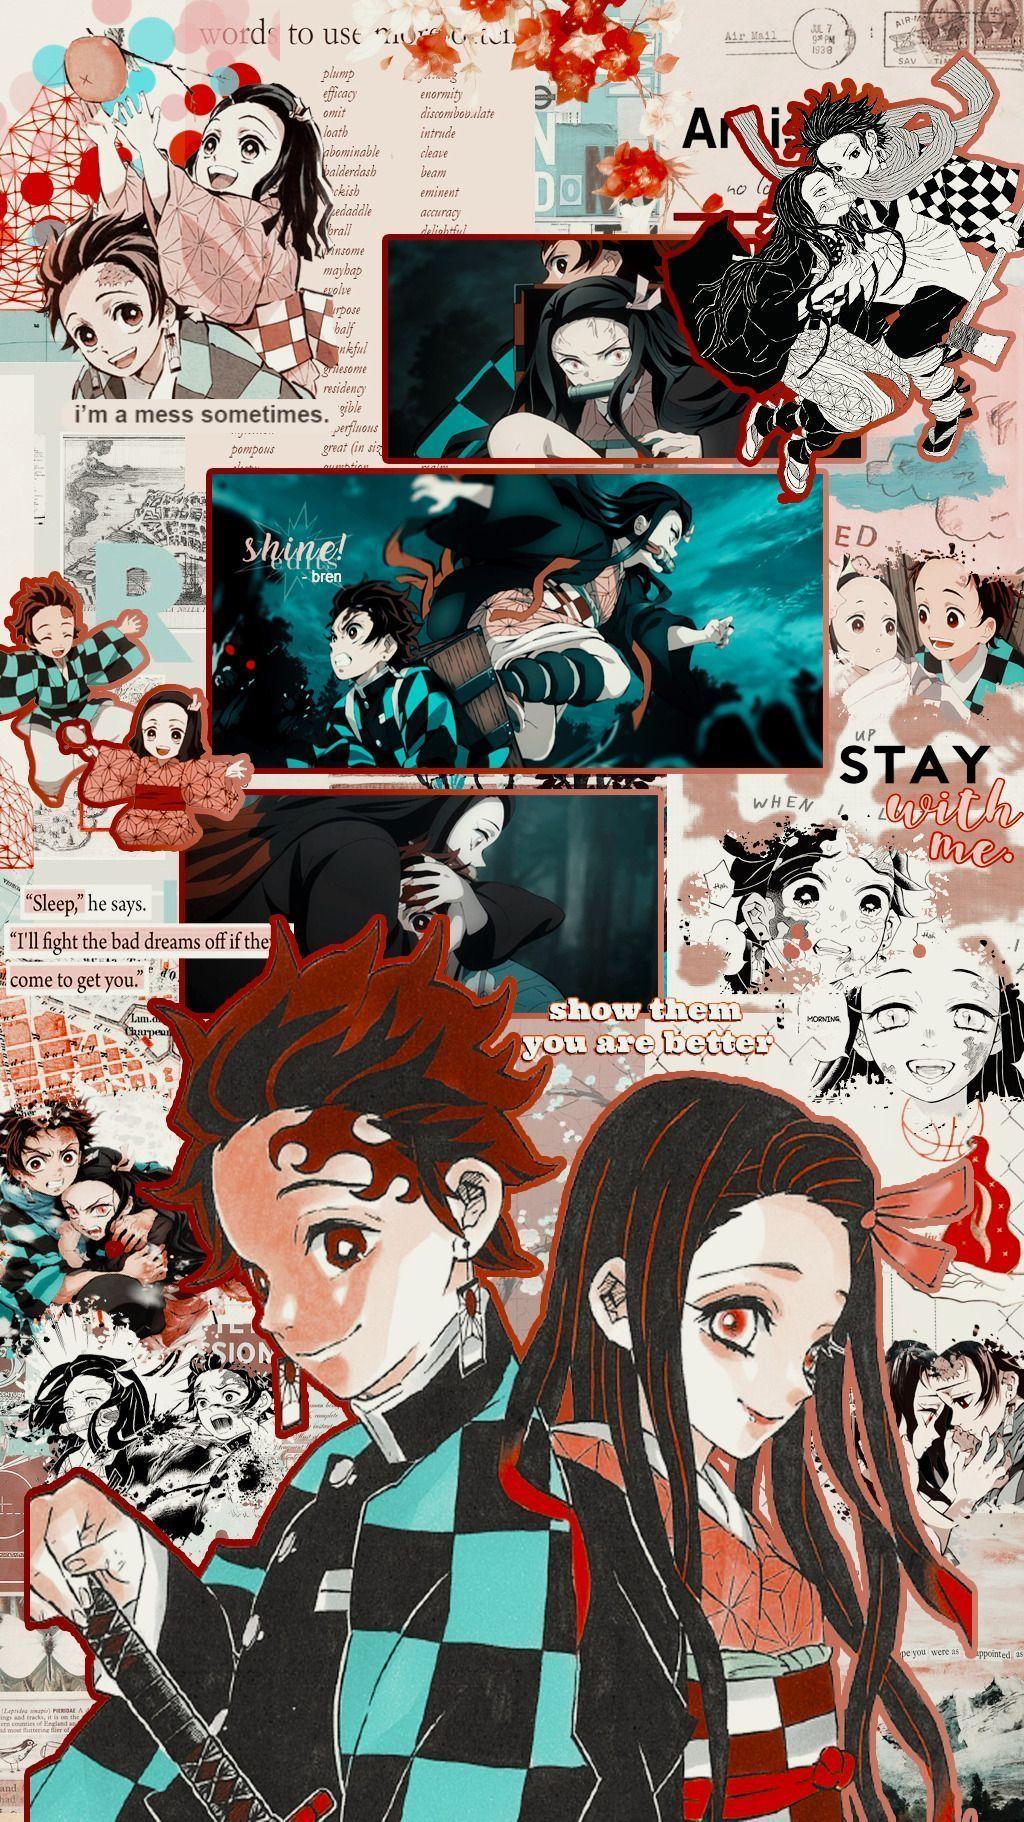 Demon Slayer Collage Wallpapers Wallpaper Cave